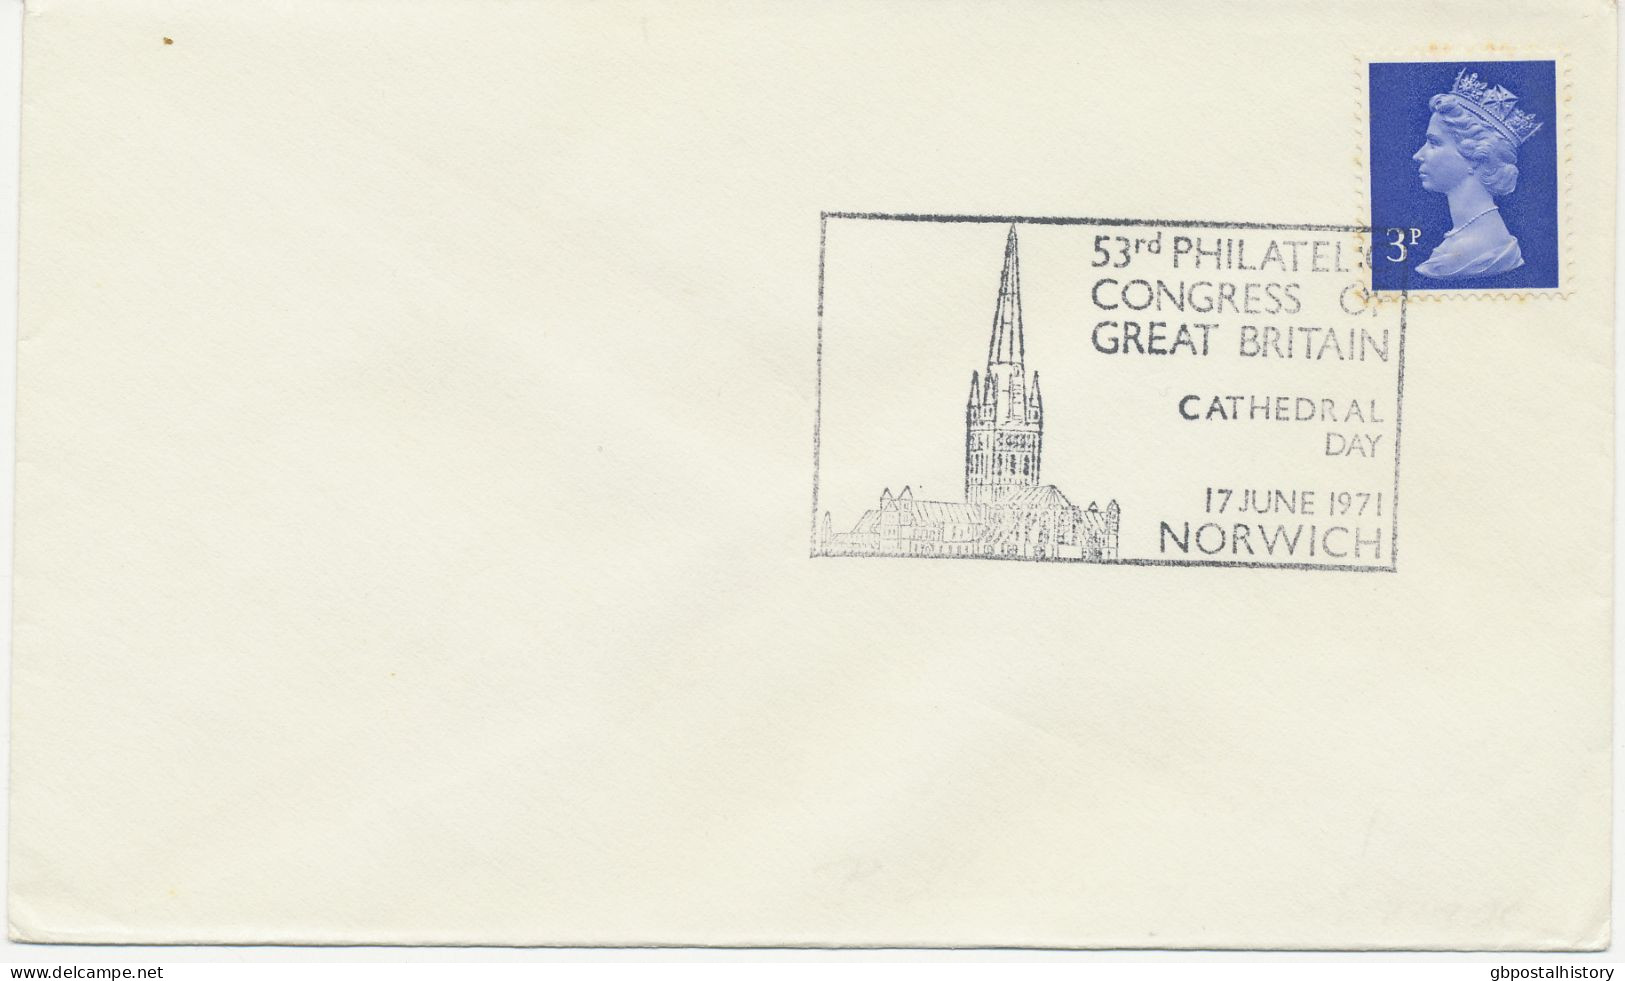 GB SPECIAL EVENT POSTMARKS 1971 53RD PHILATELIC CONGRESS OF GREAT BRITAIN NORWICH - CATHEDRAL DAY - Lettres & Documents